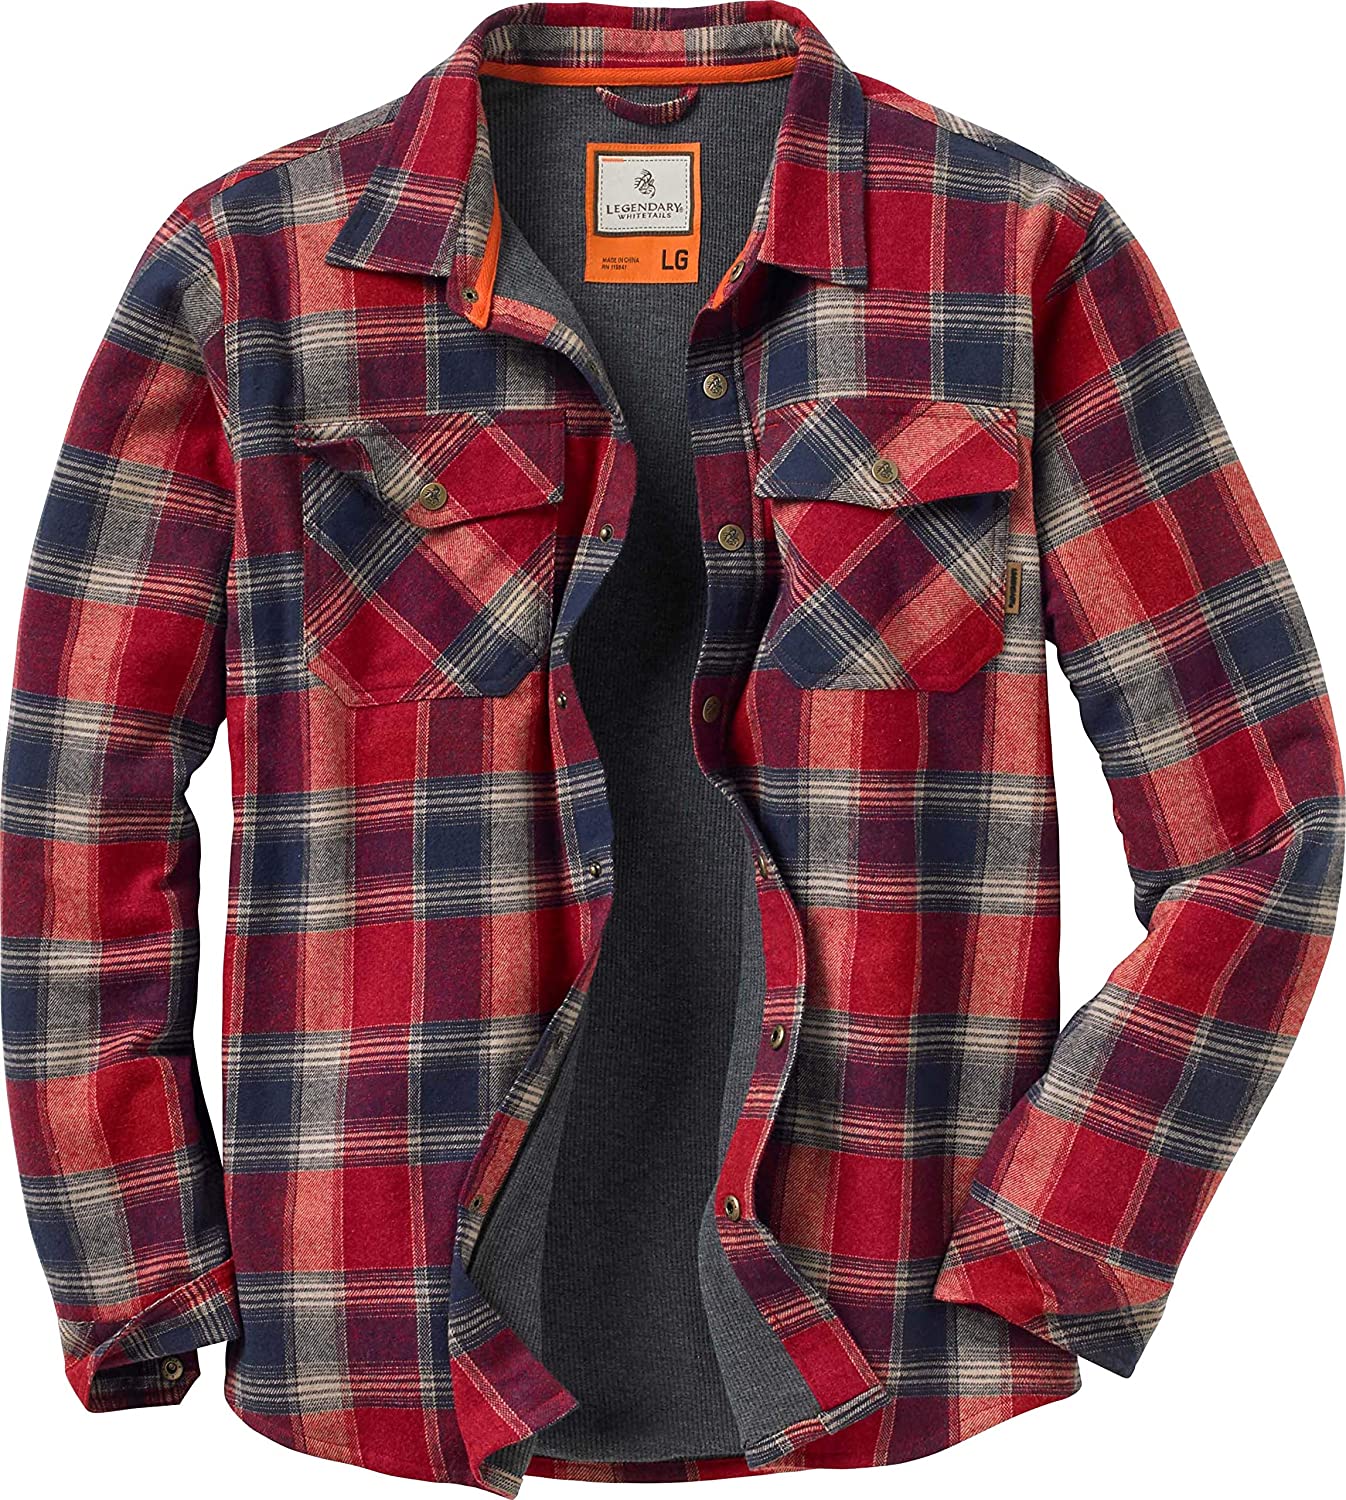 Legendary Whitetails Men's Archer Thermal Lined Flannel Shirt Jacket